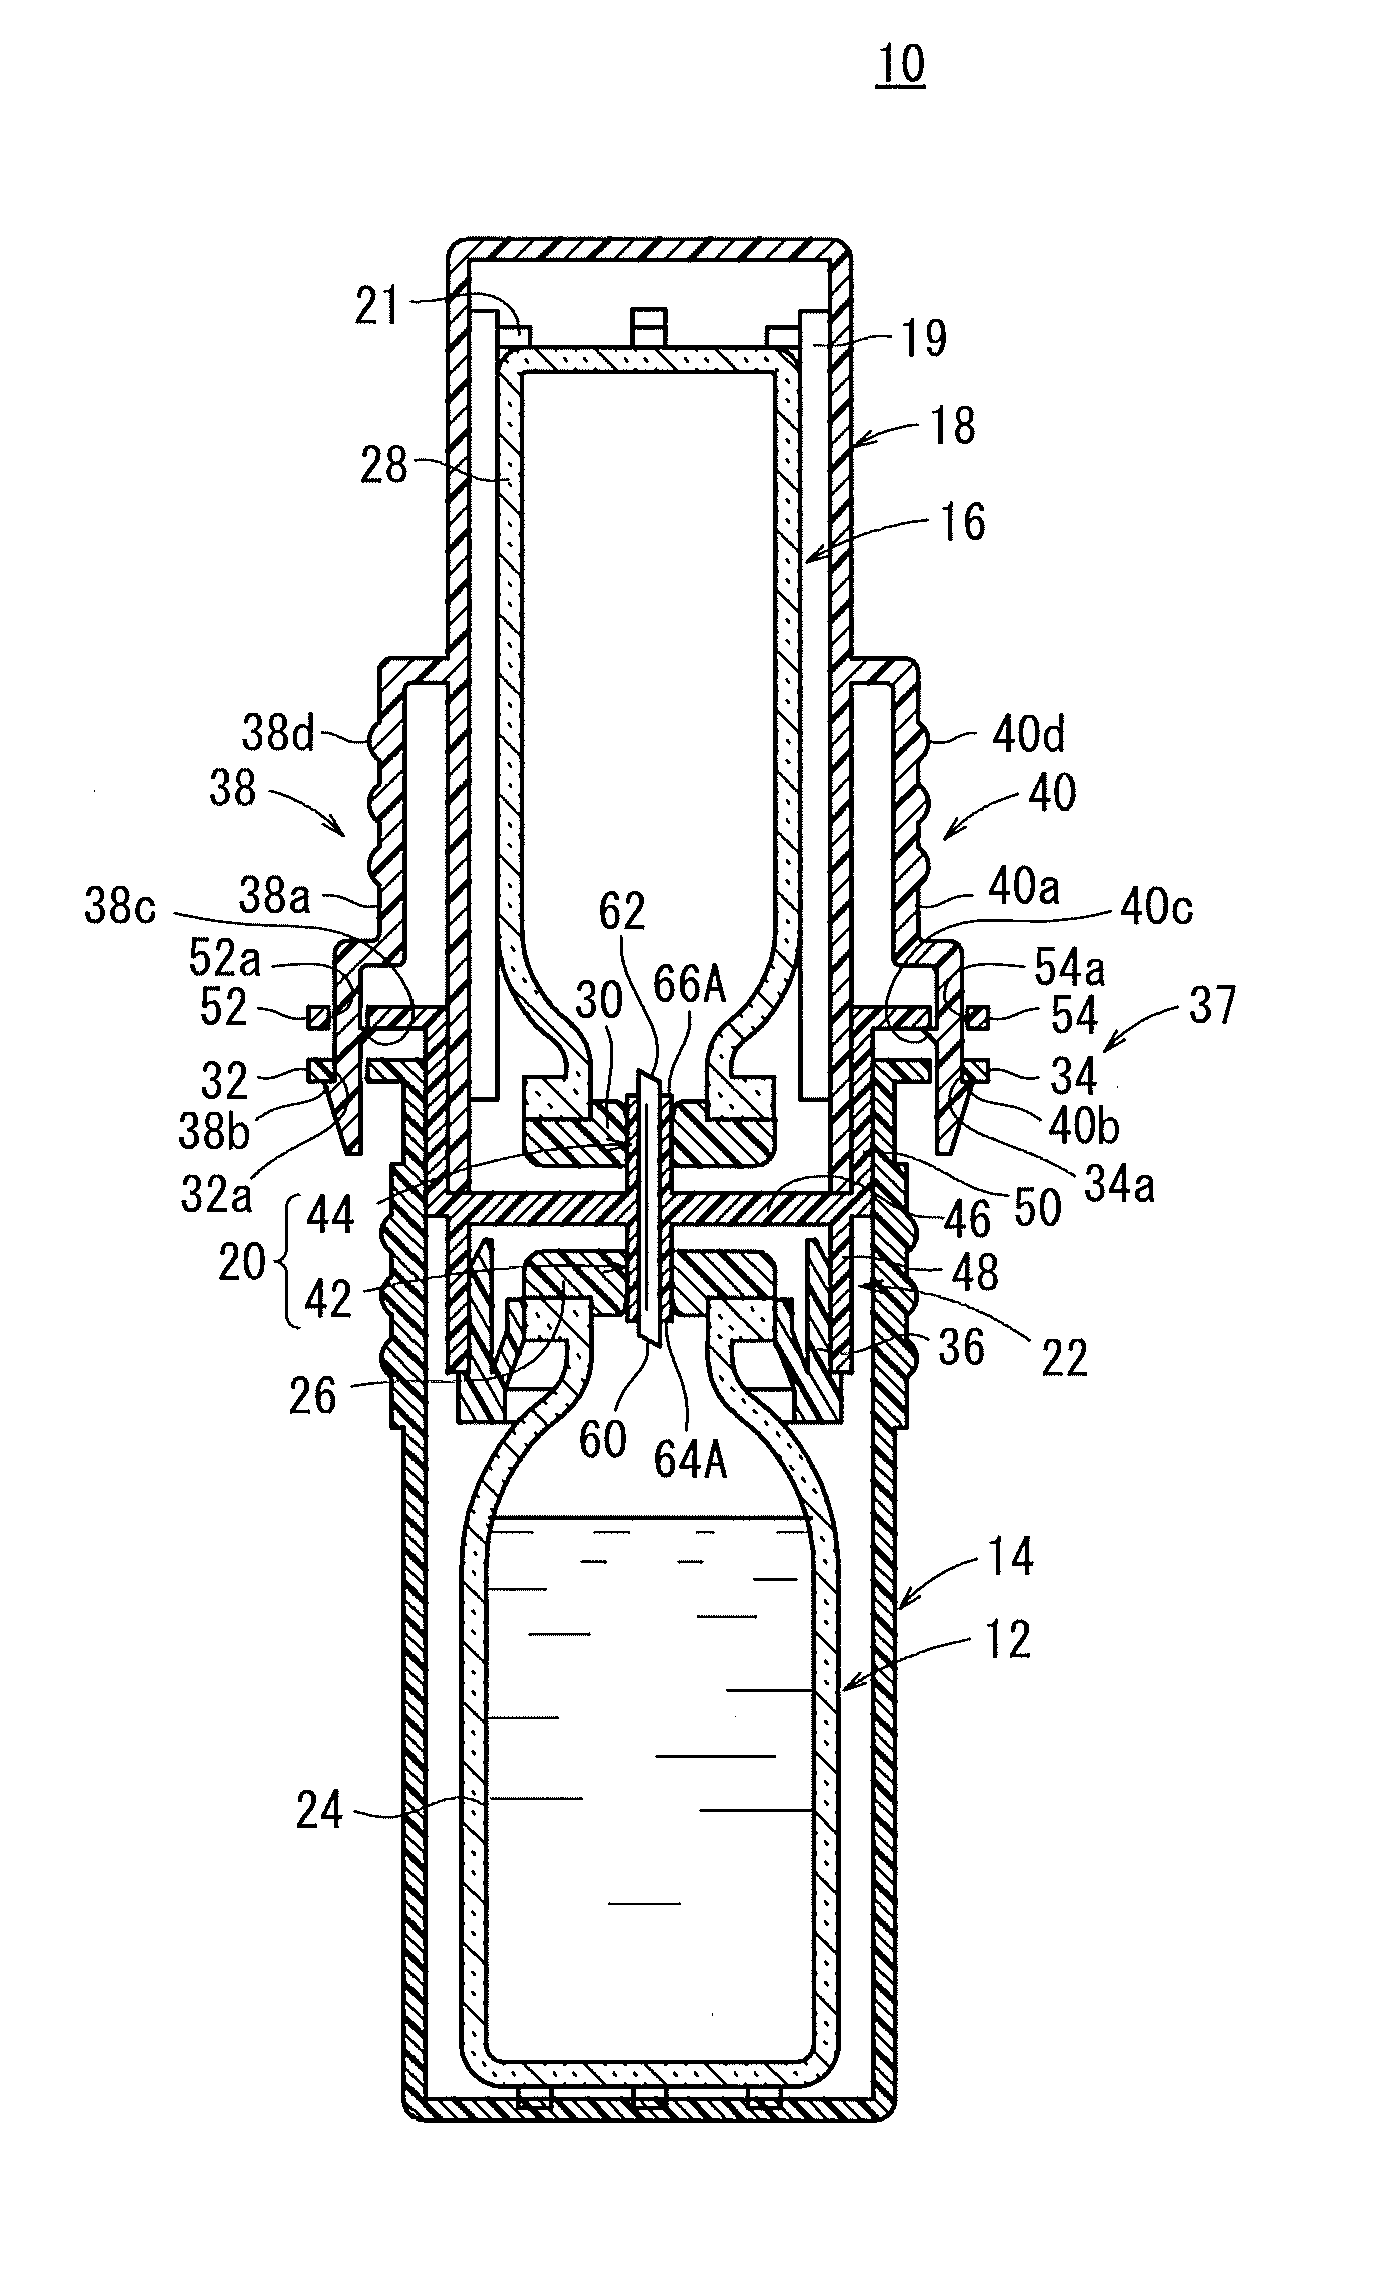 Mixing apparatus and piercing method for a double-ended needle